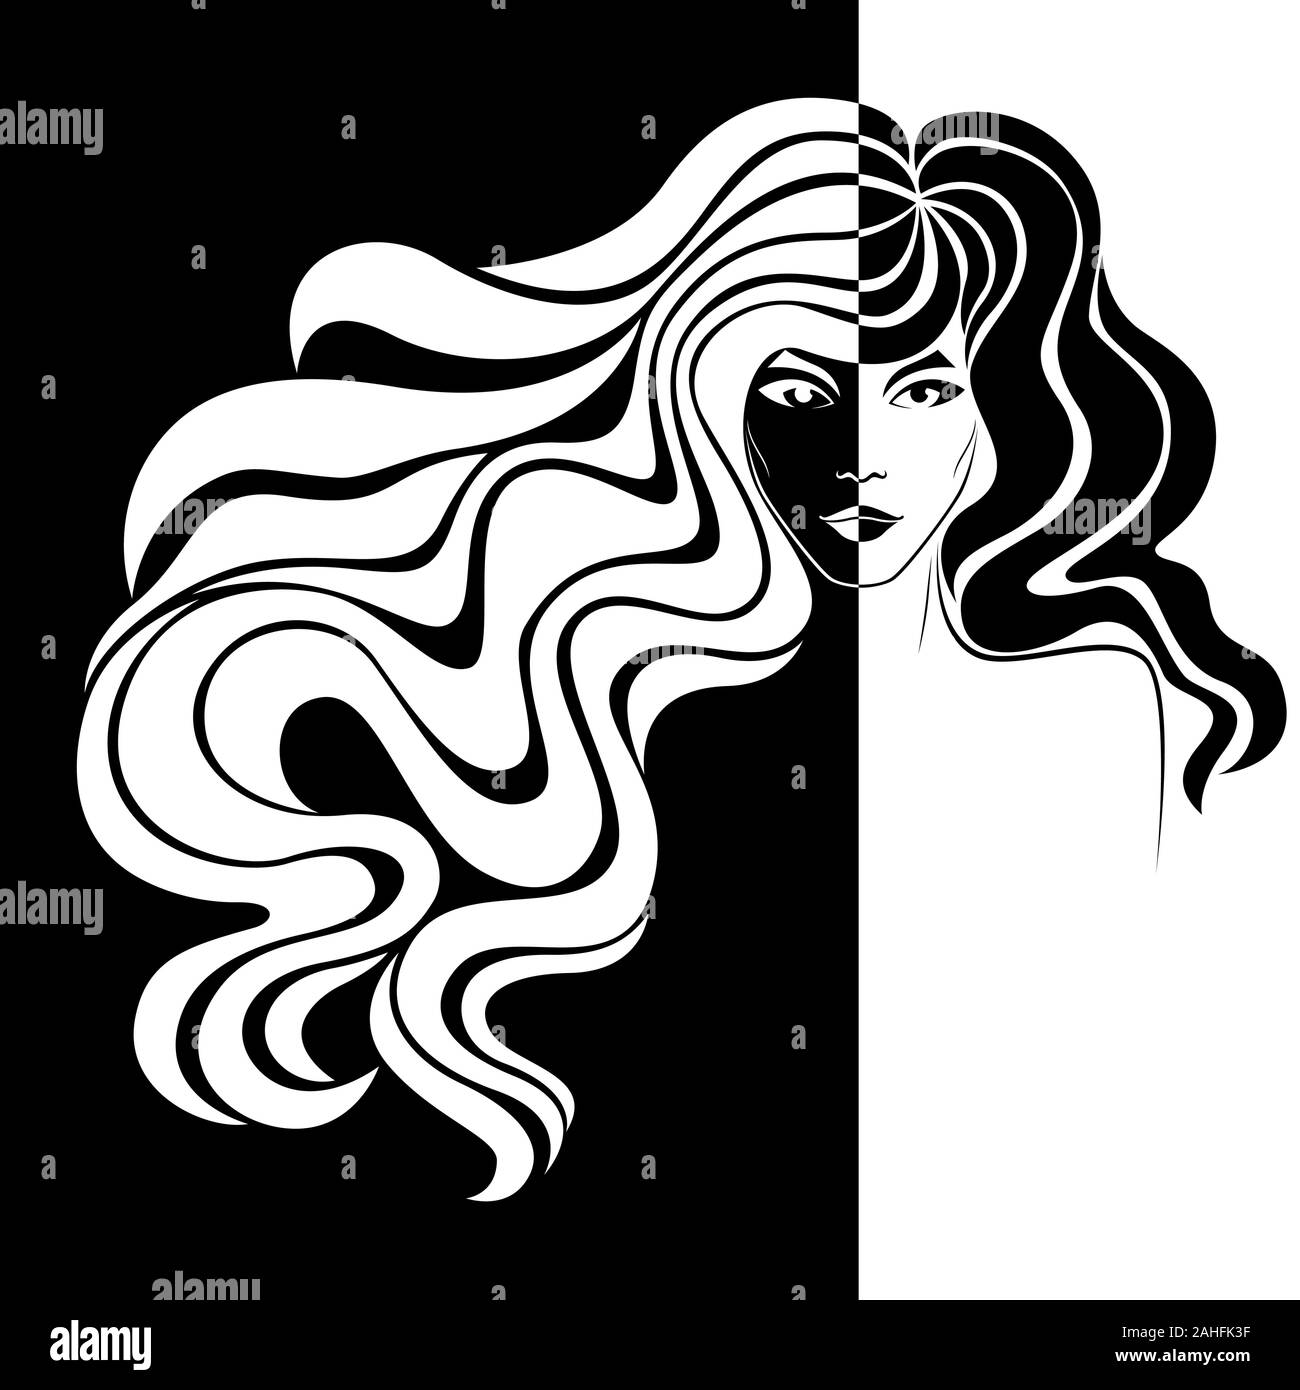 Abstract of beautiful woman's face in negative and positive space, hand drawing illustration, black and white conceptual expression Stock Vector